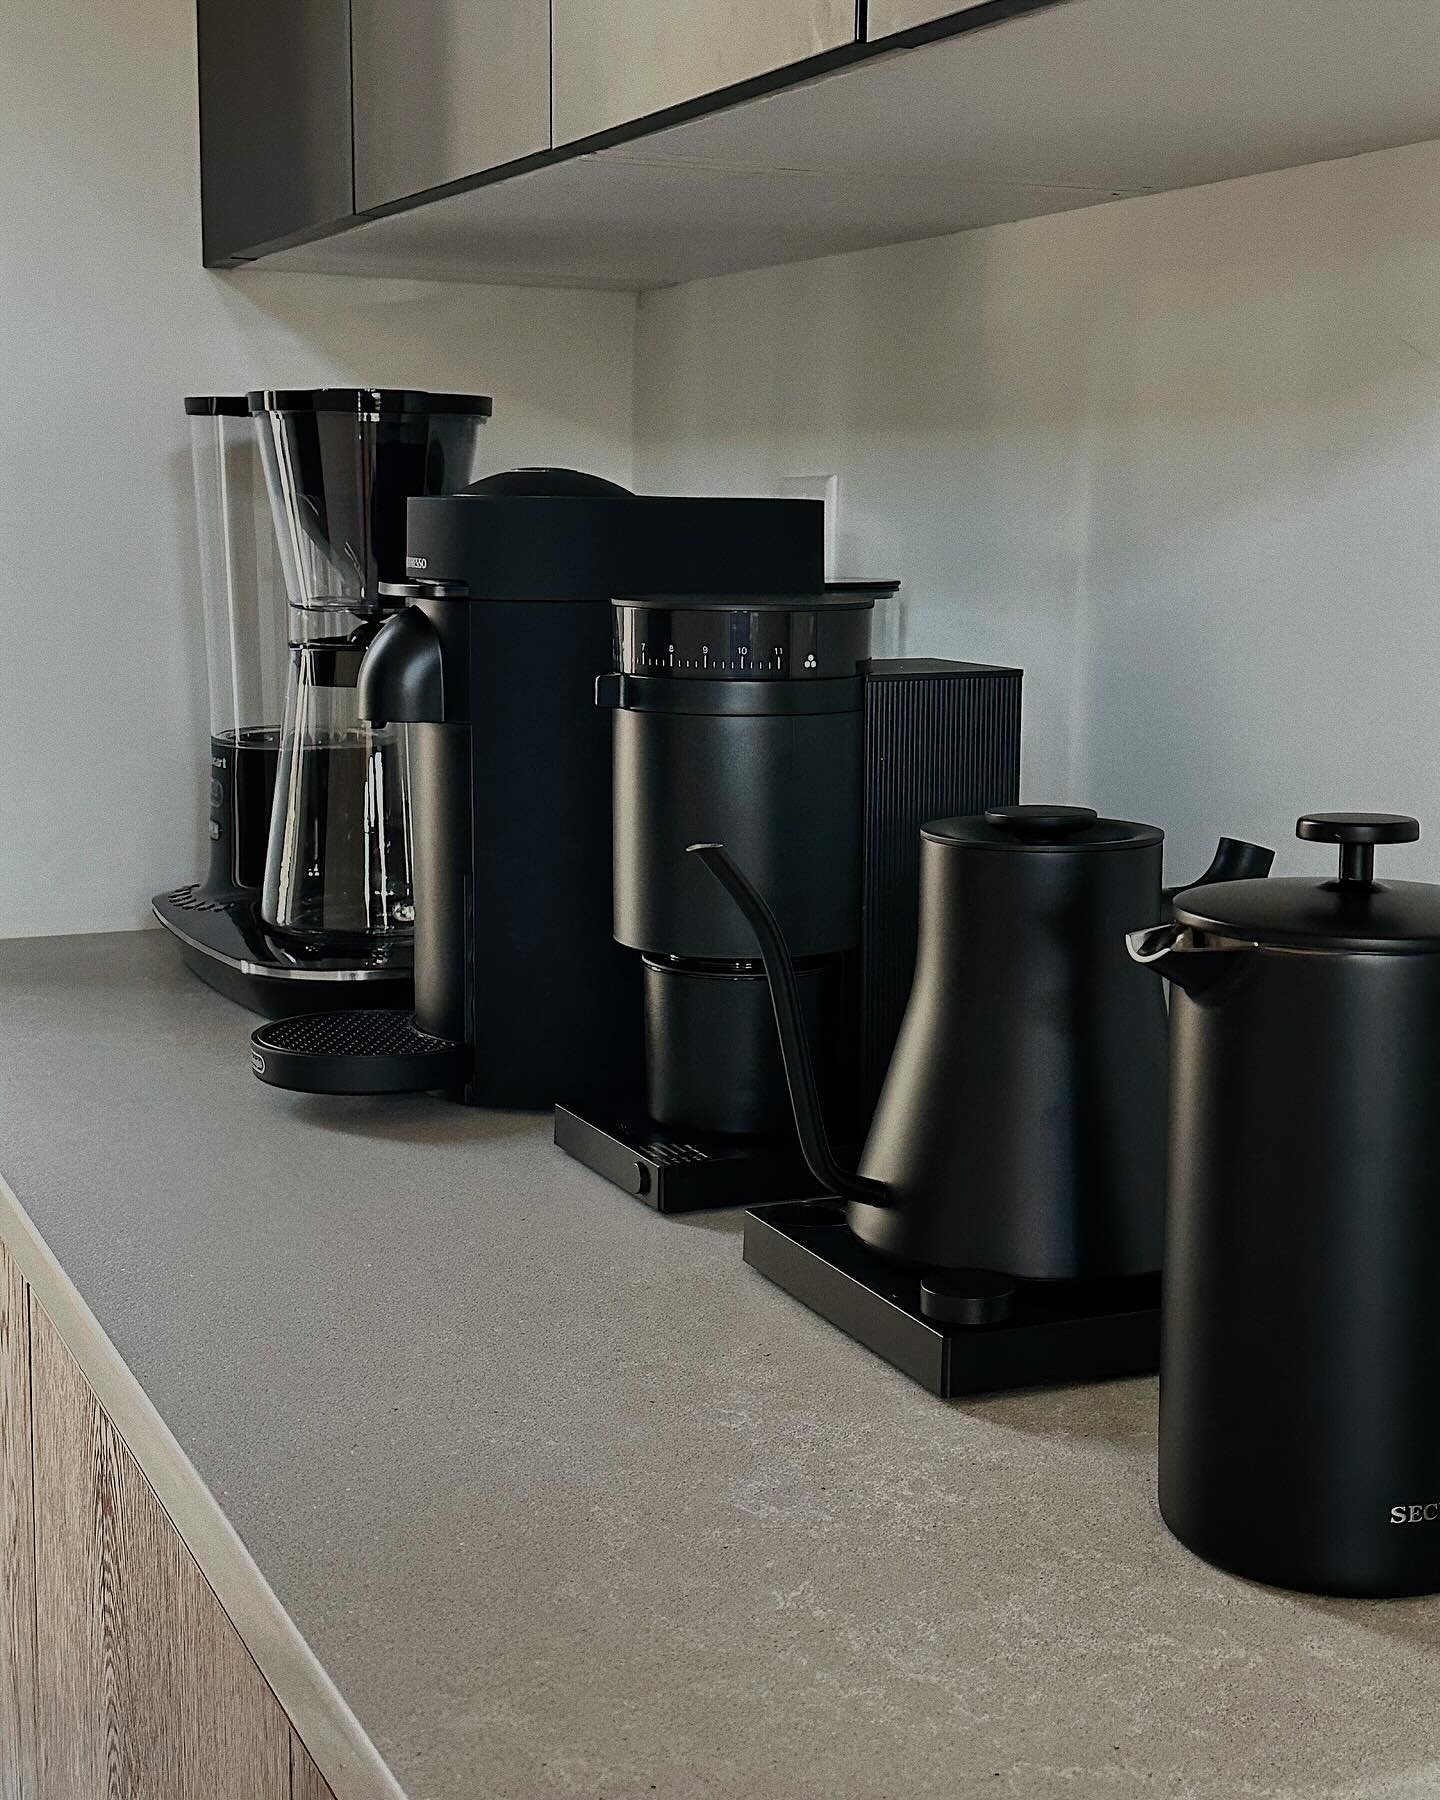 When you don&rsquo;t even have all your core furniture in&hellip; but your coffee &amp; tea station is DIALED. #priorities

What&rsquo;s your favorite method to enjoy a delicious cup of coffee or tea? ☕️🫖

(Not pictured in the cabinet above: A Cheme